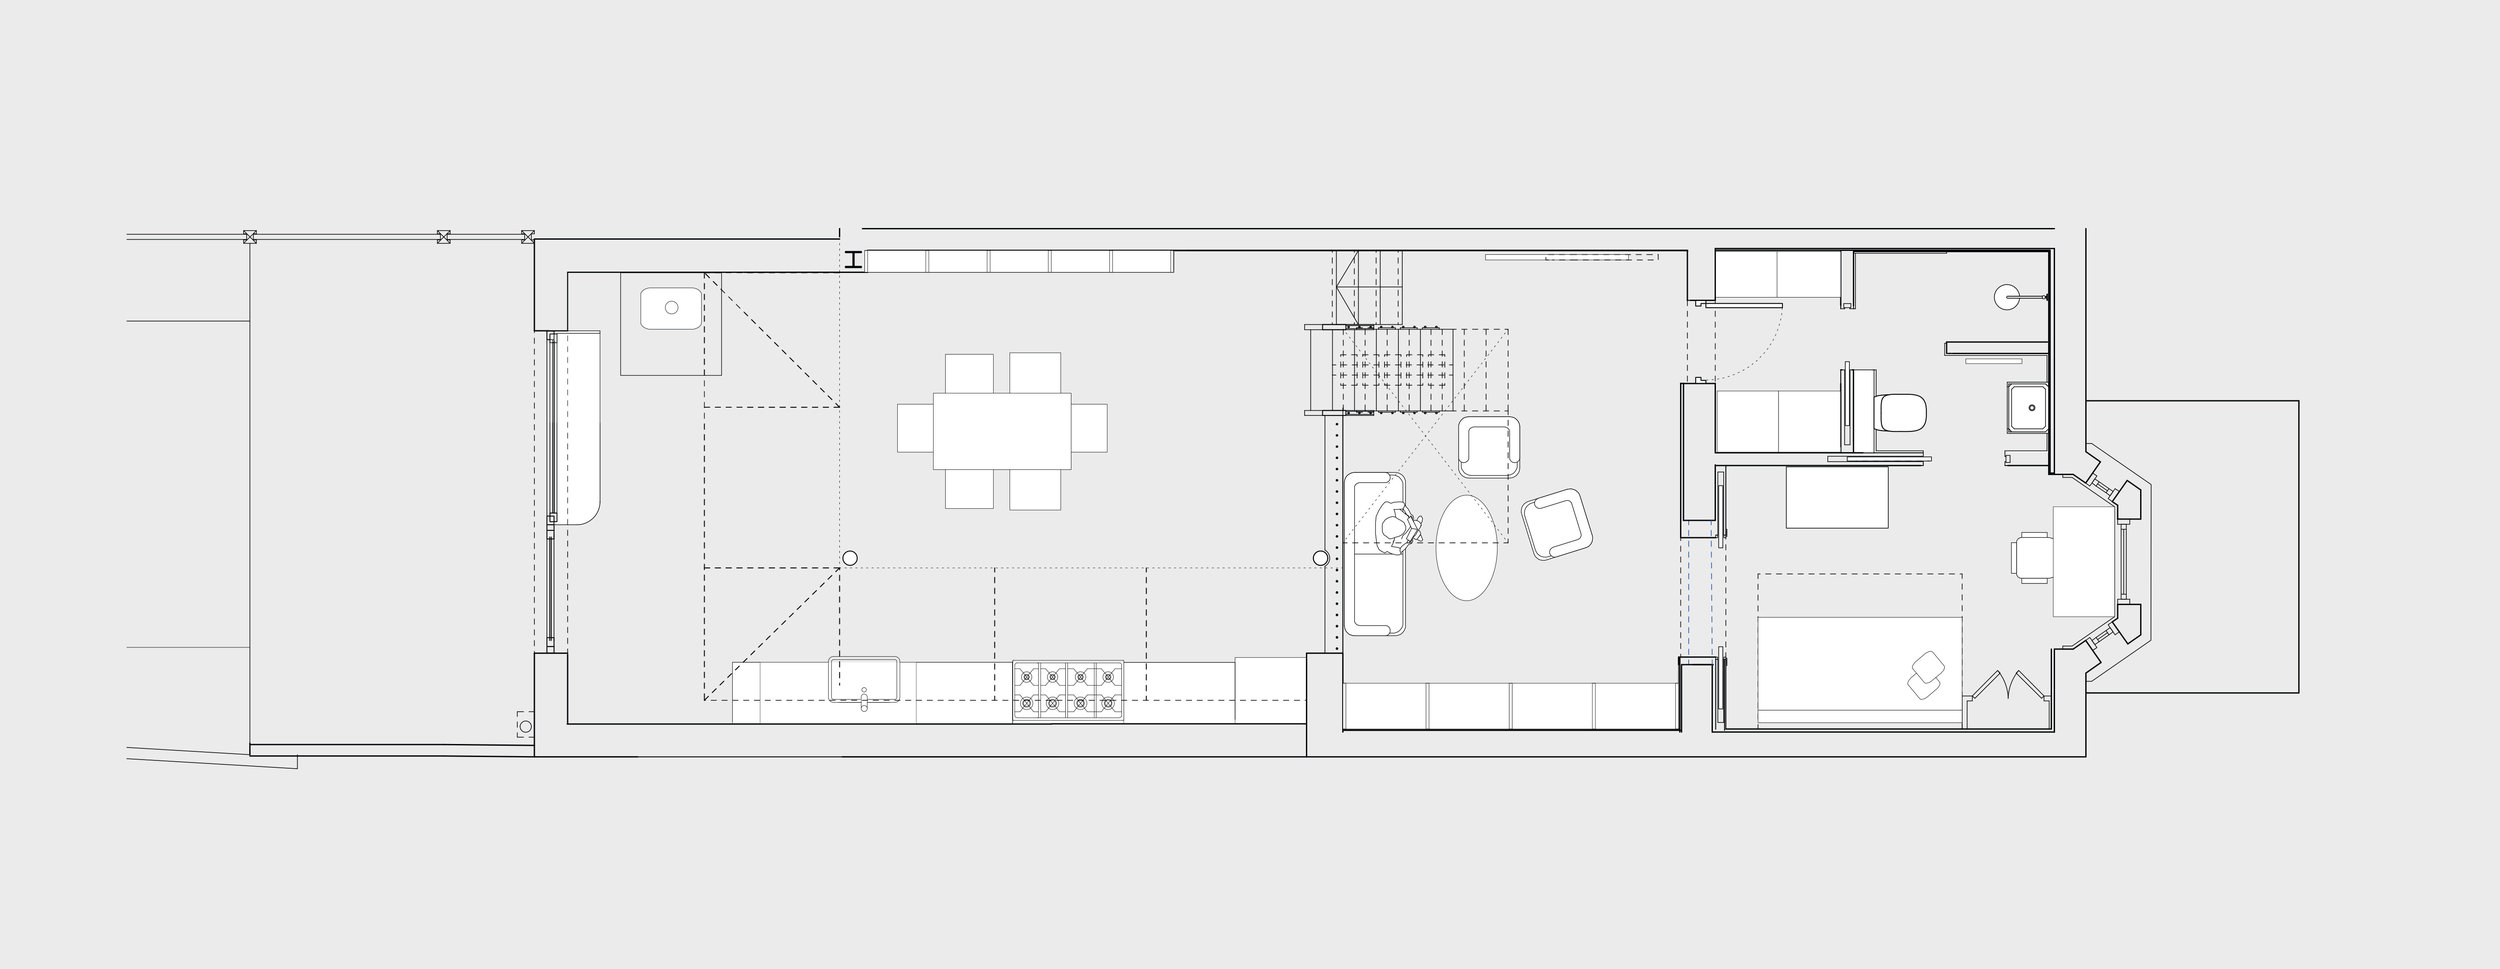  Basement and lower ground floor plan with new extension 